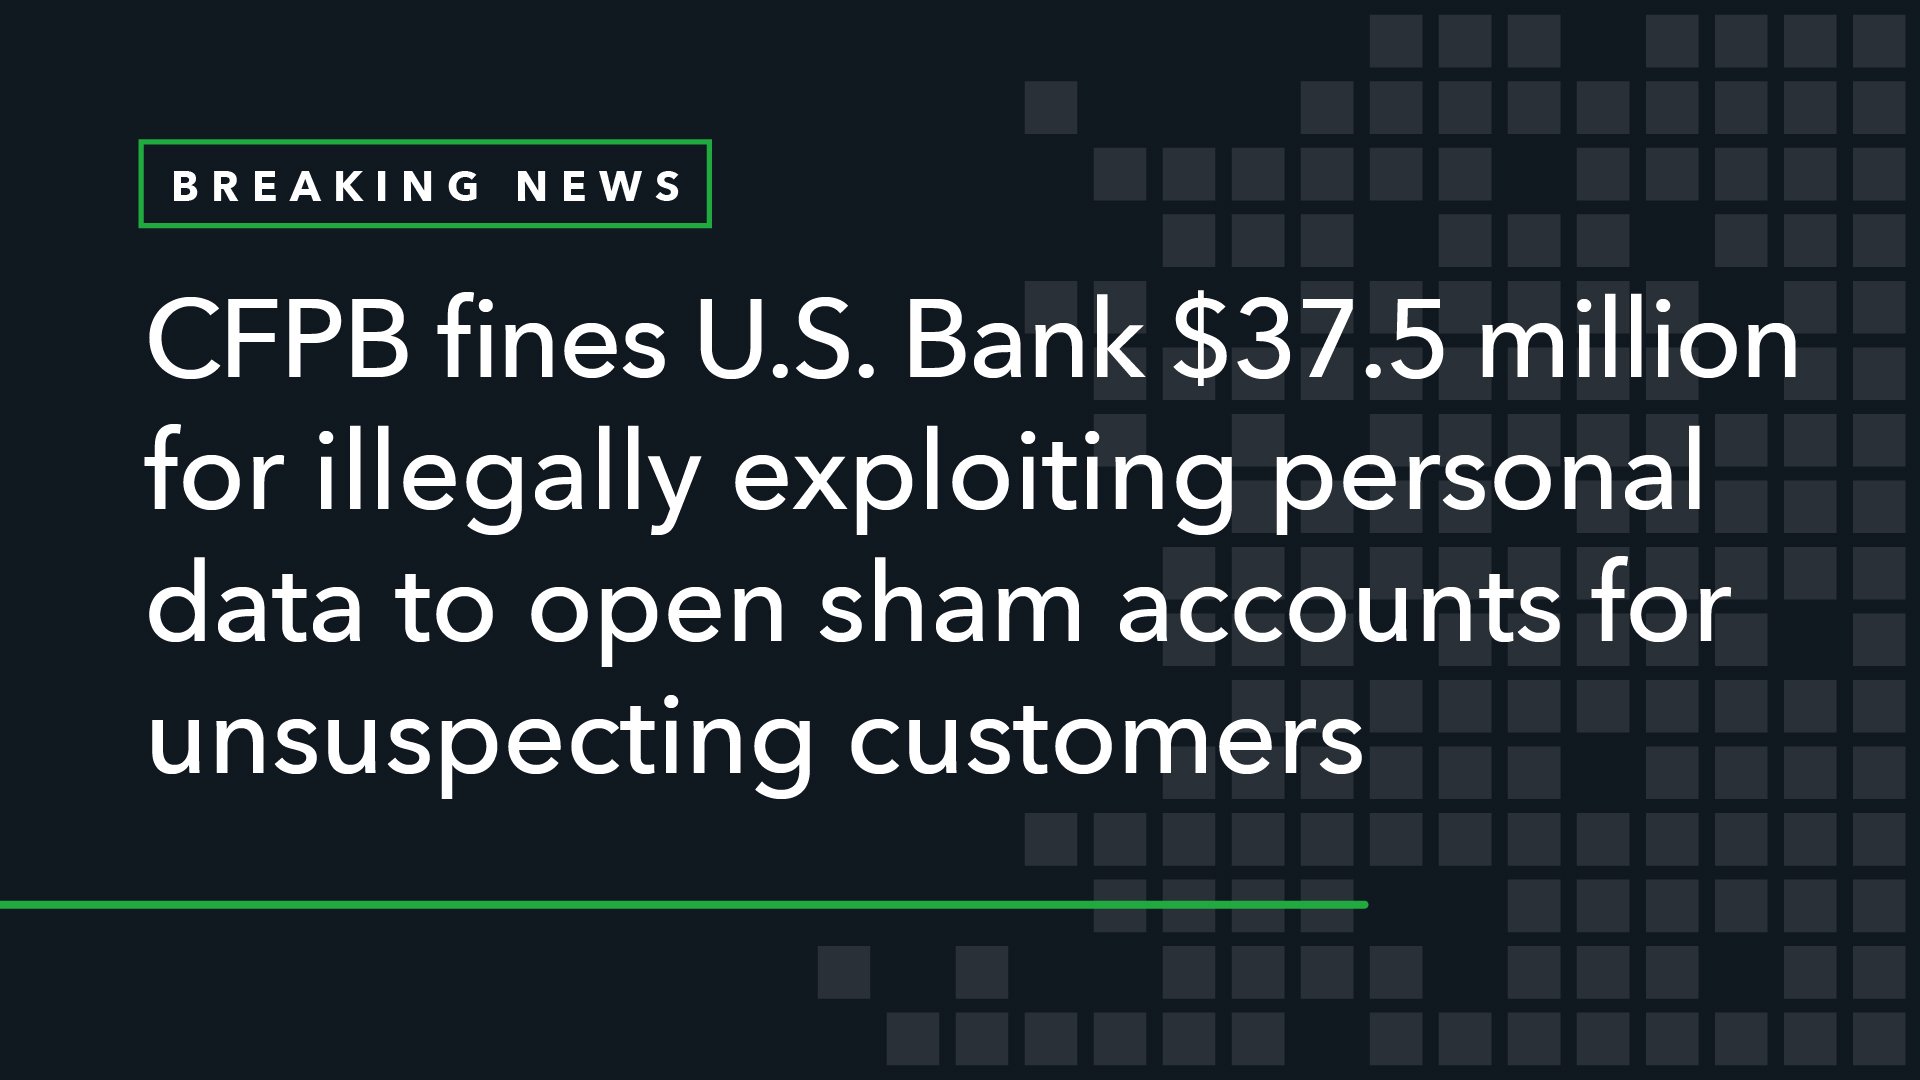 CFPB Fines U.S. Bank $37.5 Million for Illegally Exploiting Personal Data to Open Sham Accounts for Unsuspecting Customers